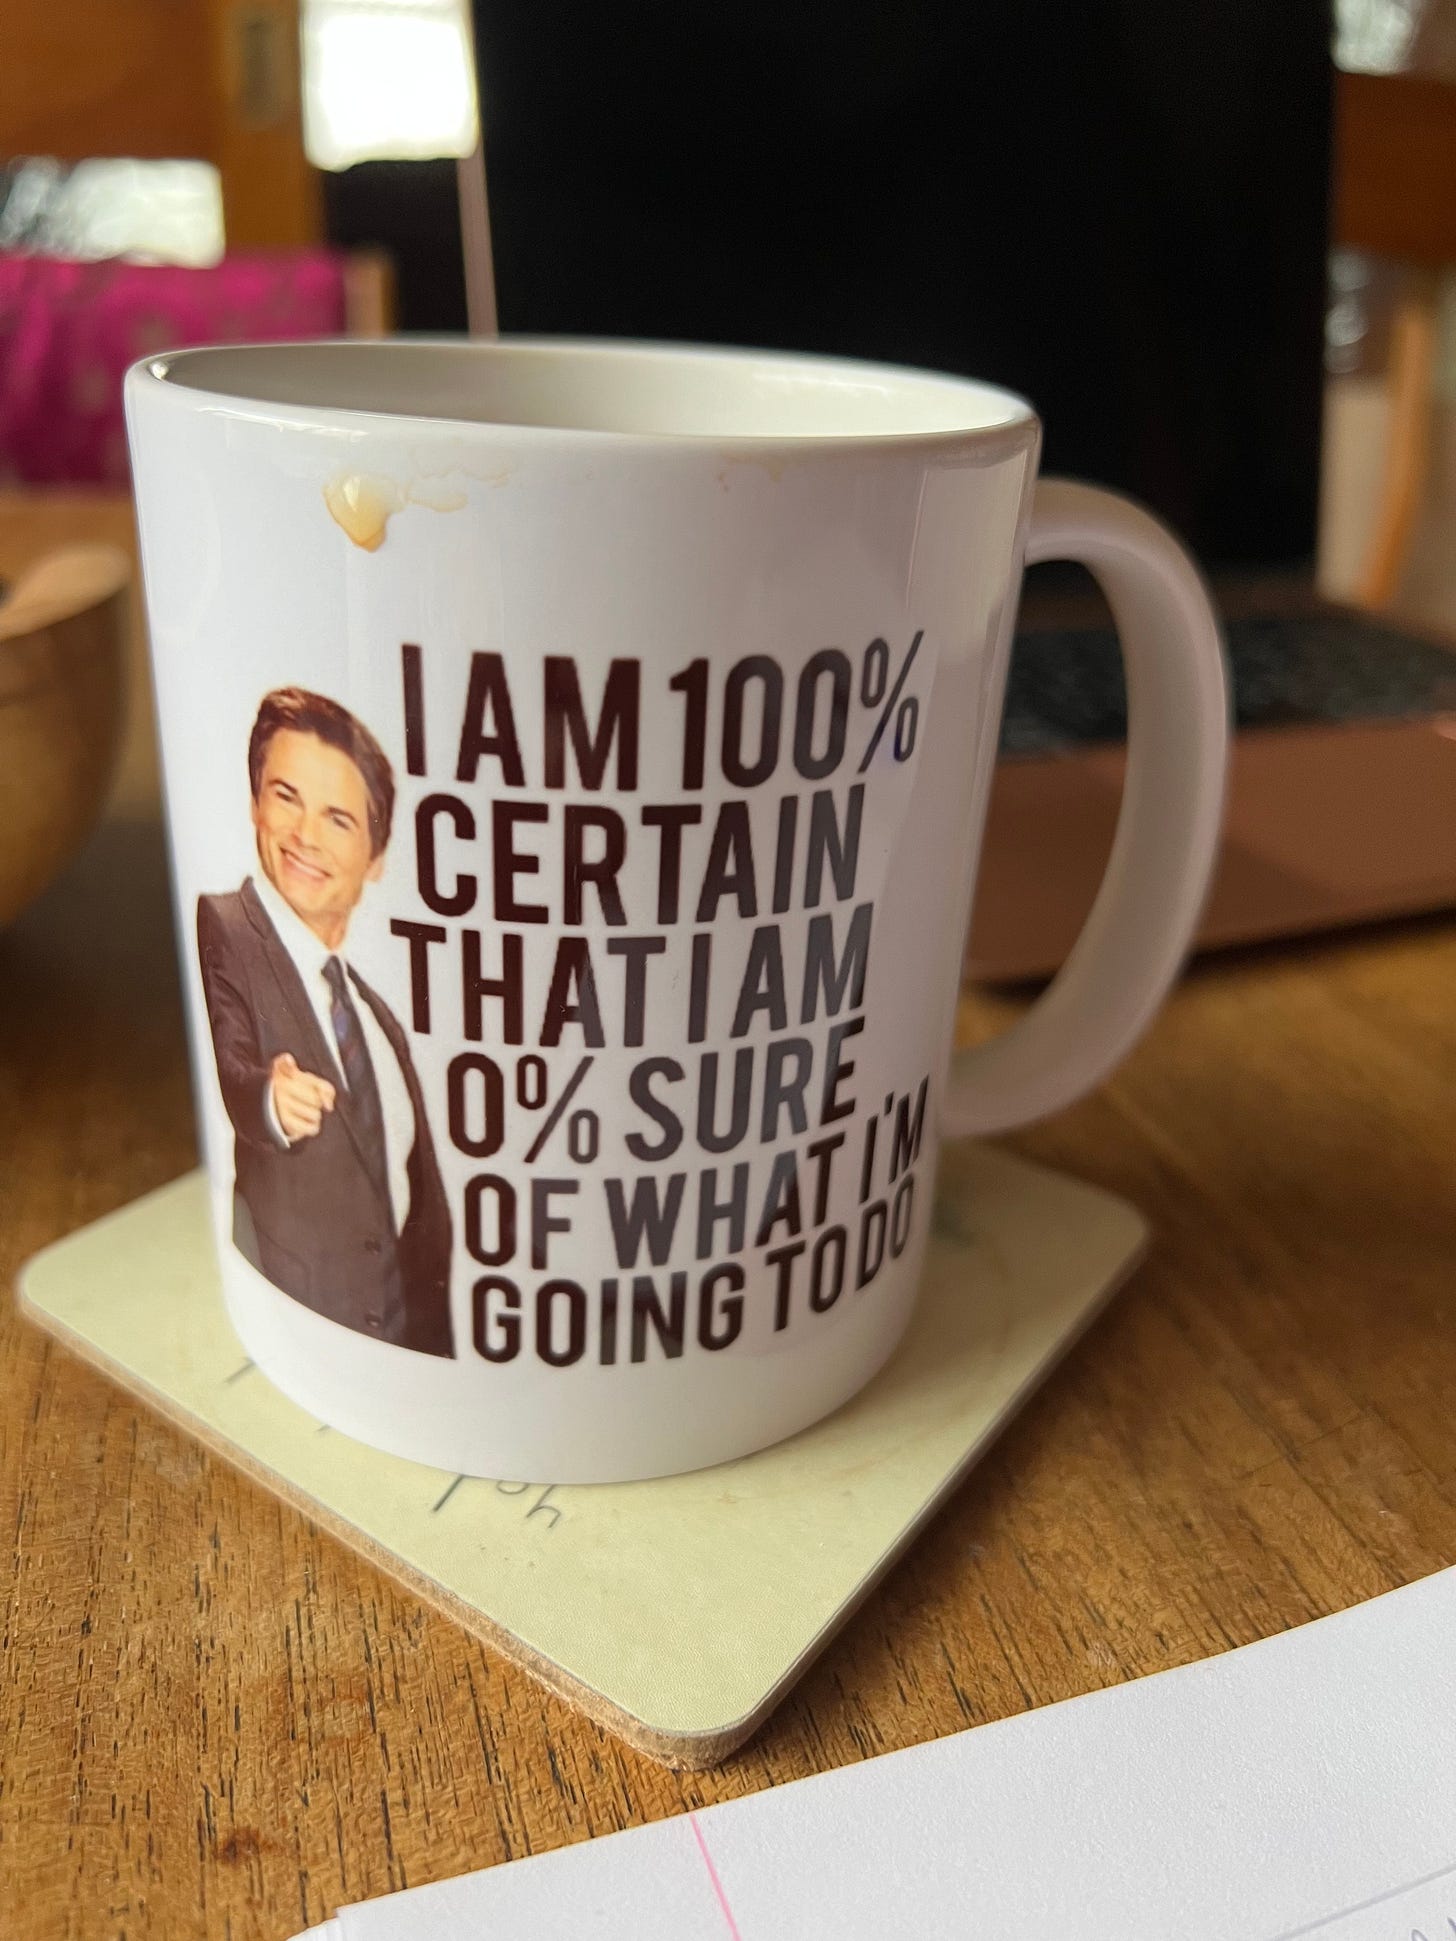 A white mug with a picture of a smiling man (Chris Traeger from Parks & Rec) and the phrase"I am 100% certain that I am 0% sure of what I'm going to do"